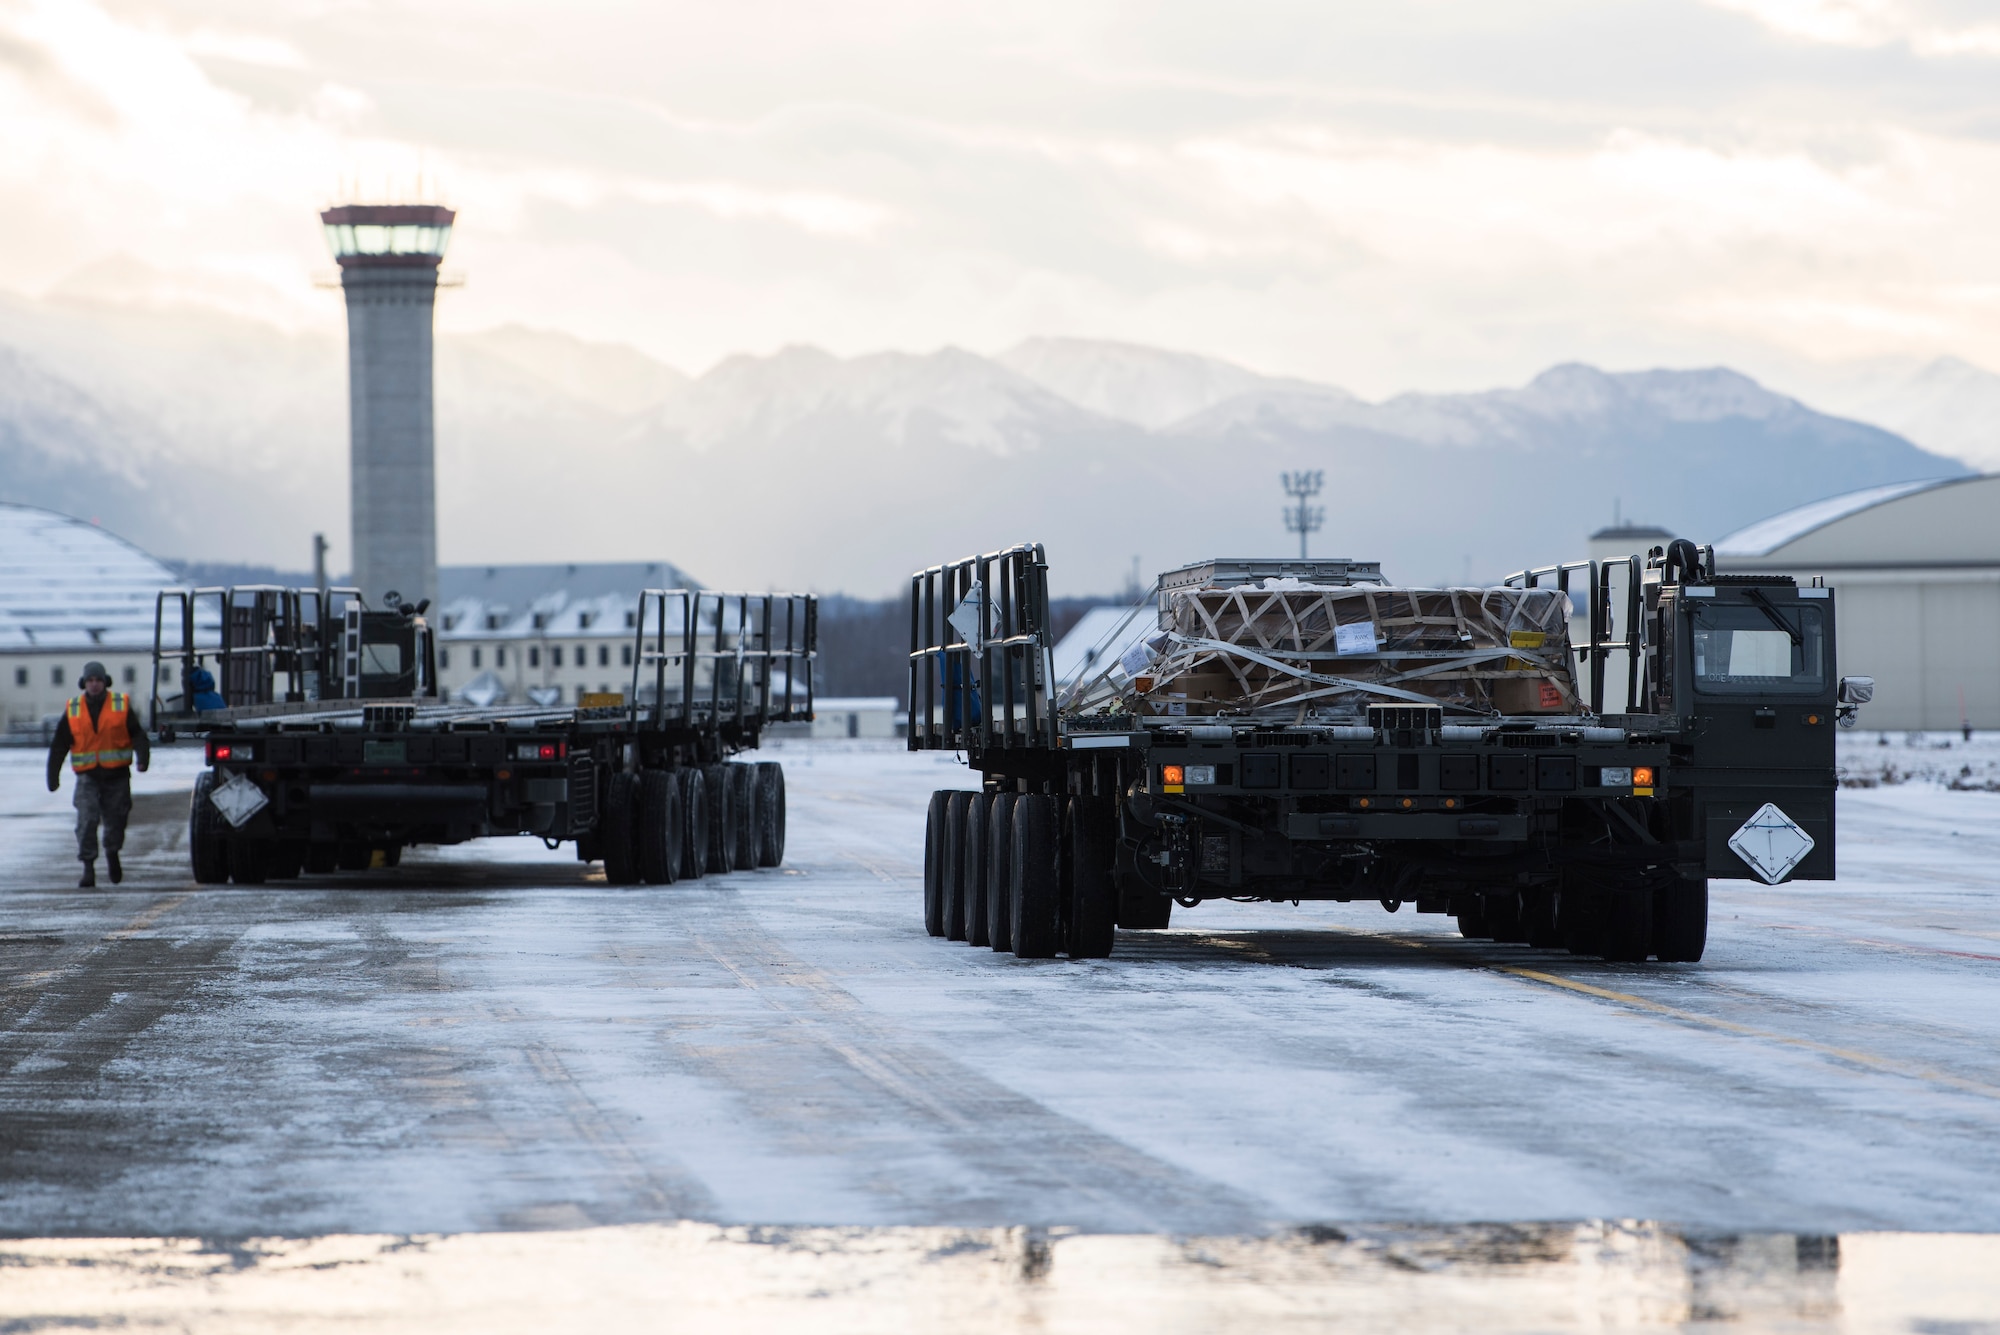 A k-loader containing cargo waits prior to offloading onto a C-17 Globemaster III at Joint Base Elmendorf-Richardson, Alaska, Dec. 1, 2018. JBER mission operations continue following a 7.0 earthquake hit to Anchorage, Alaska, on Nov. 30.